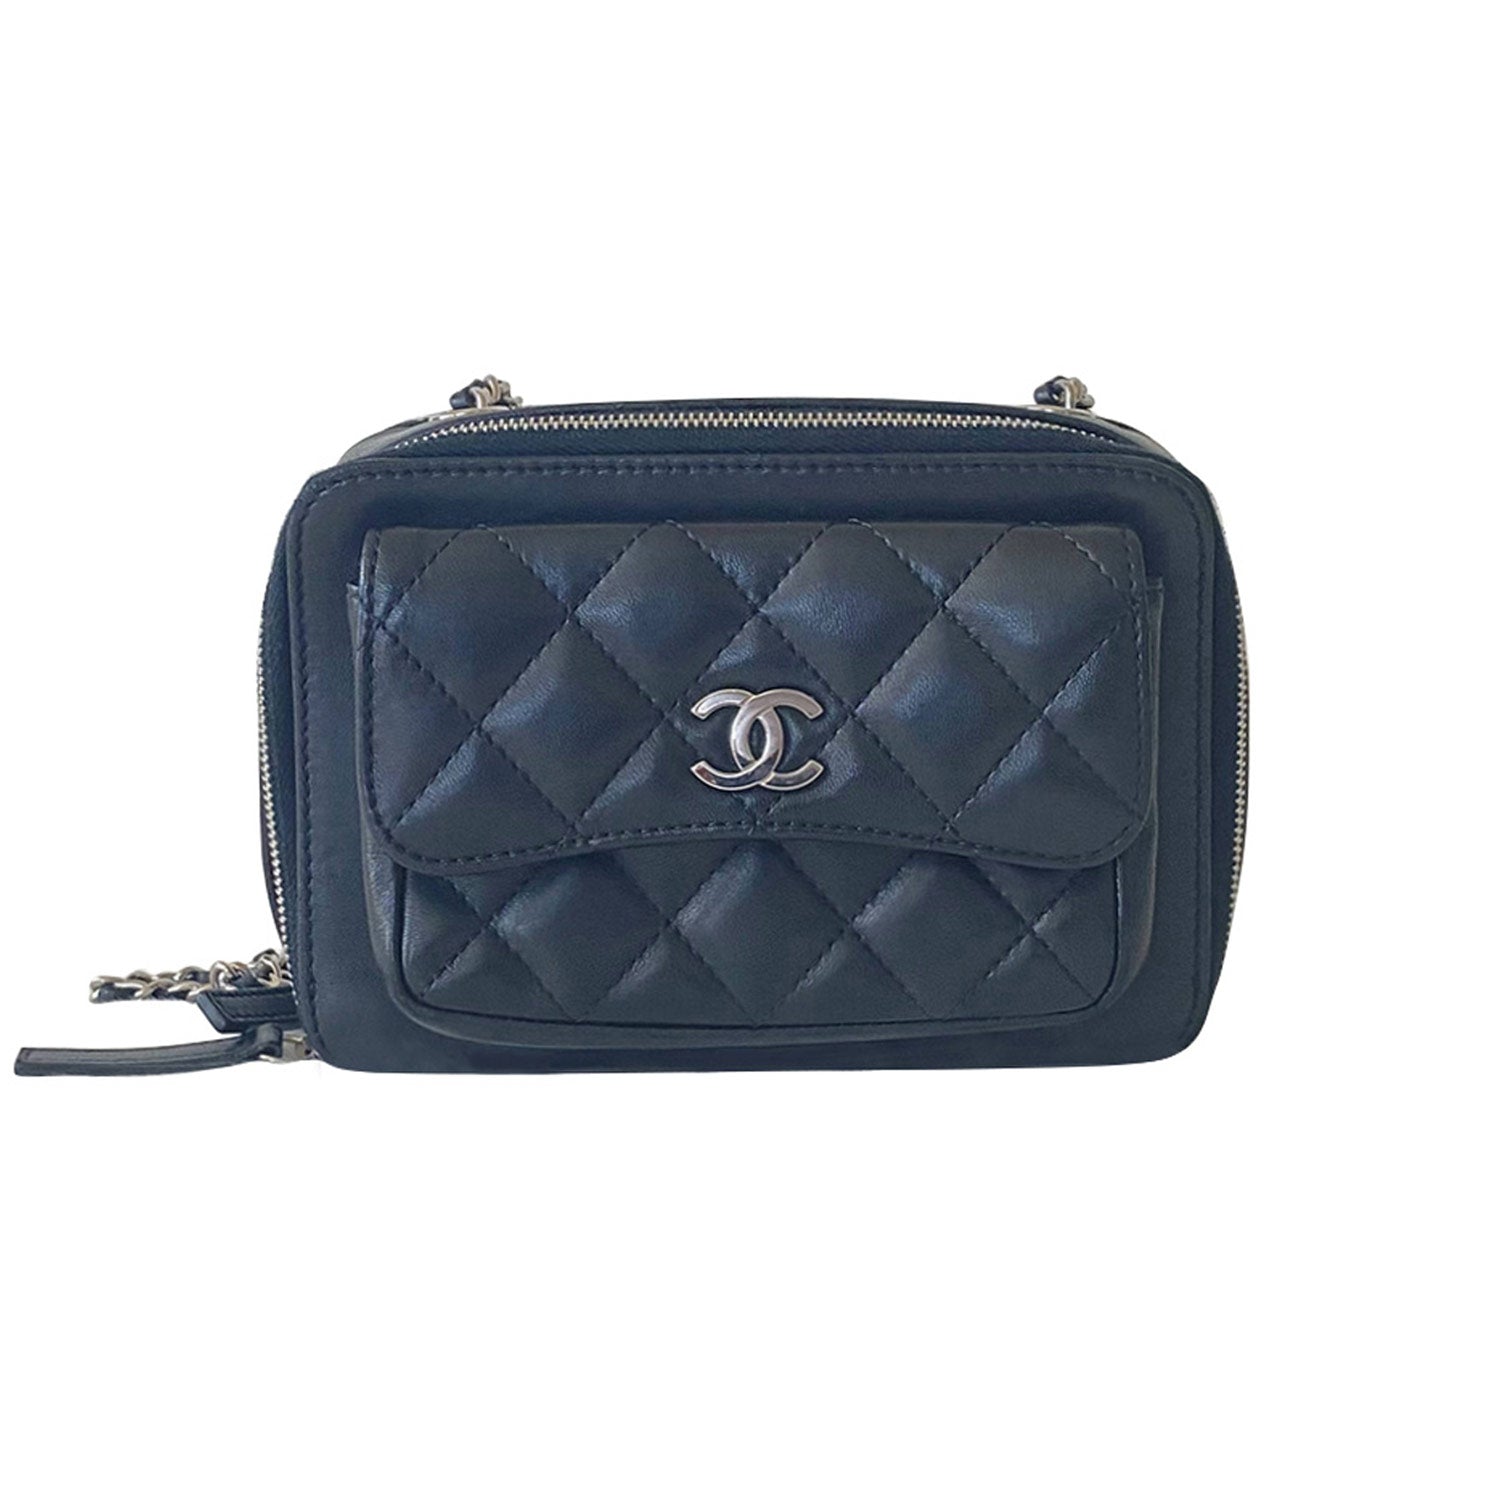 Shop authentic Chanel Small Pocket Box Camera Case at revogue for just USD  3,000.00